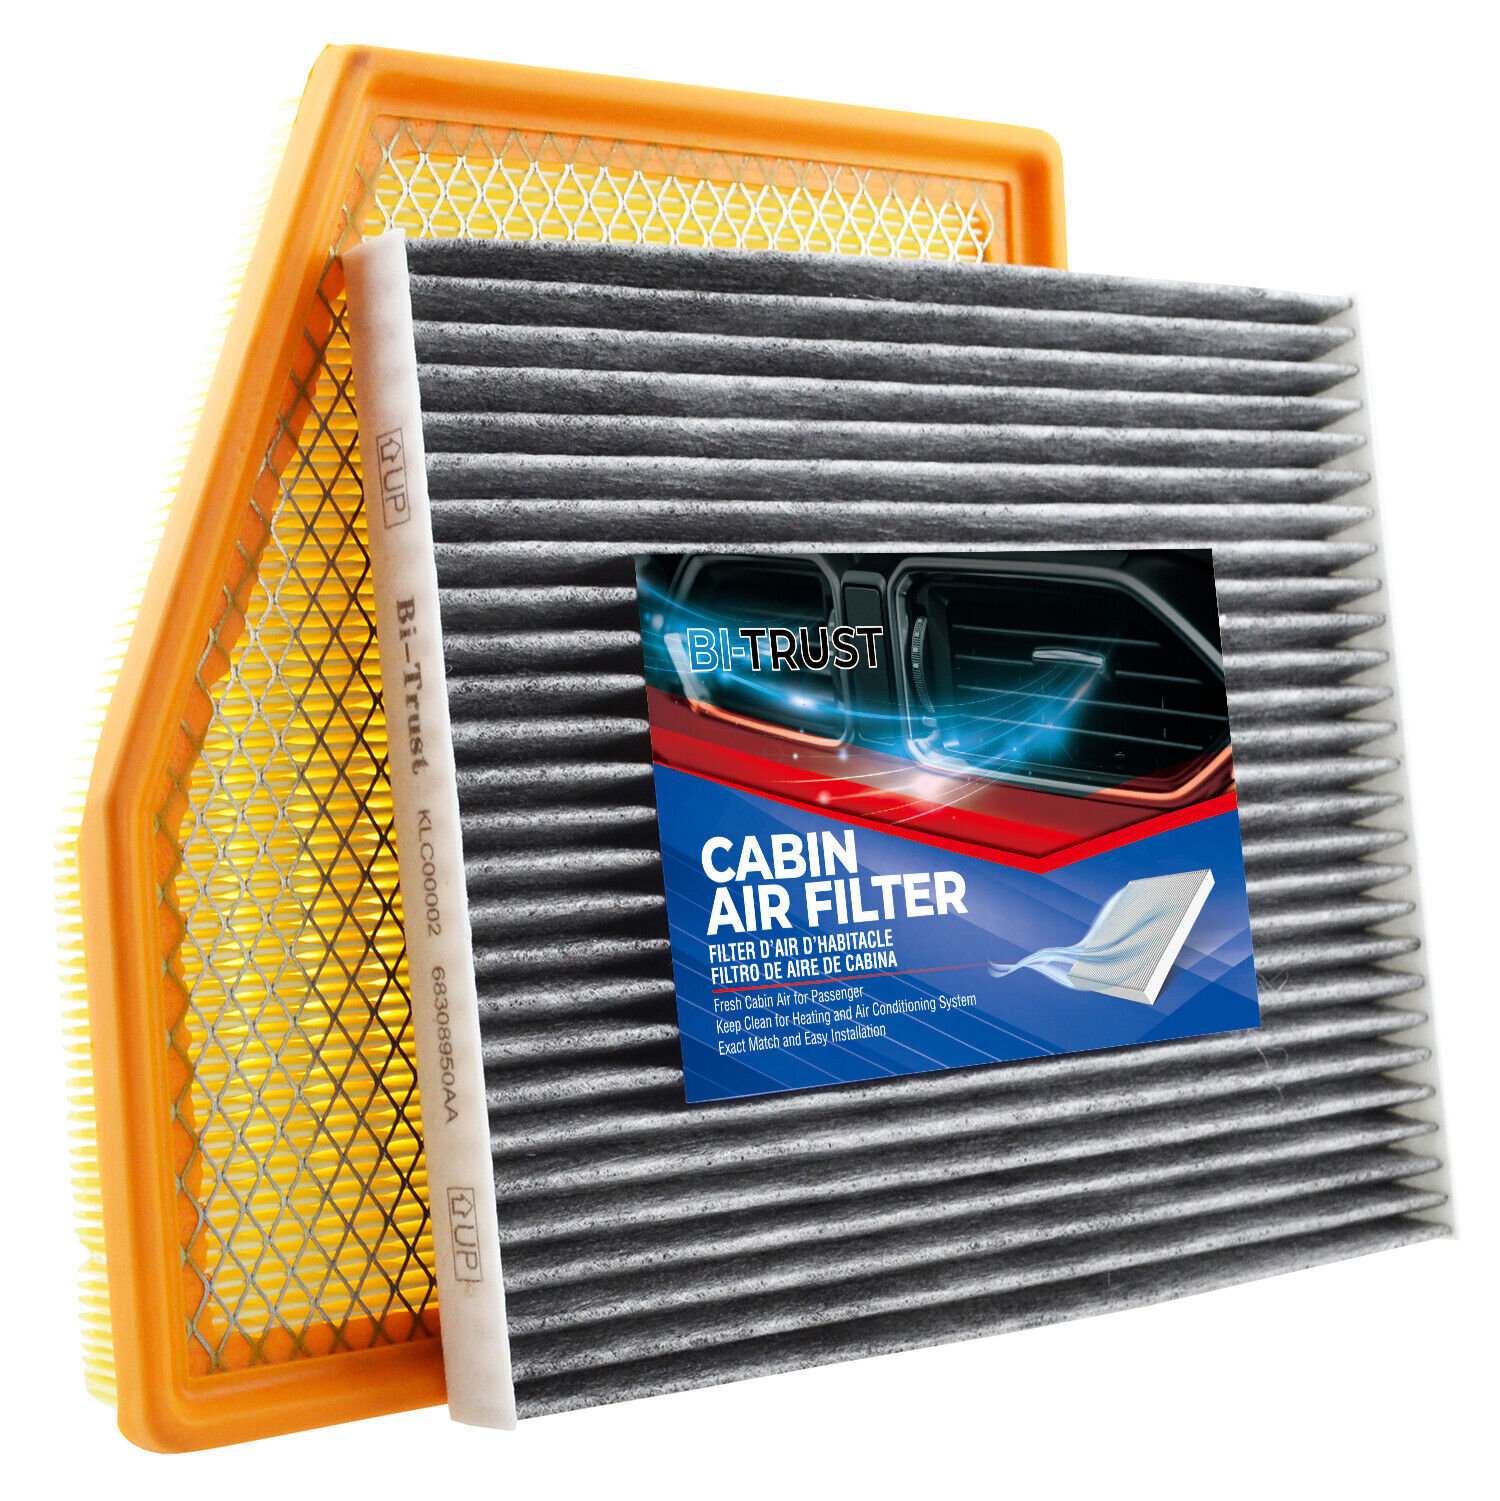 Air Filter Bundle for Chrysler Grand Caravan Pacifica Voyager - Engine and Cabin